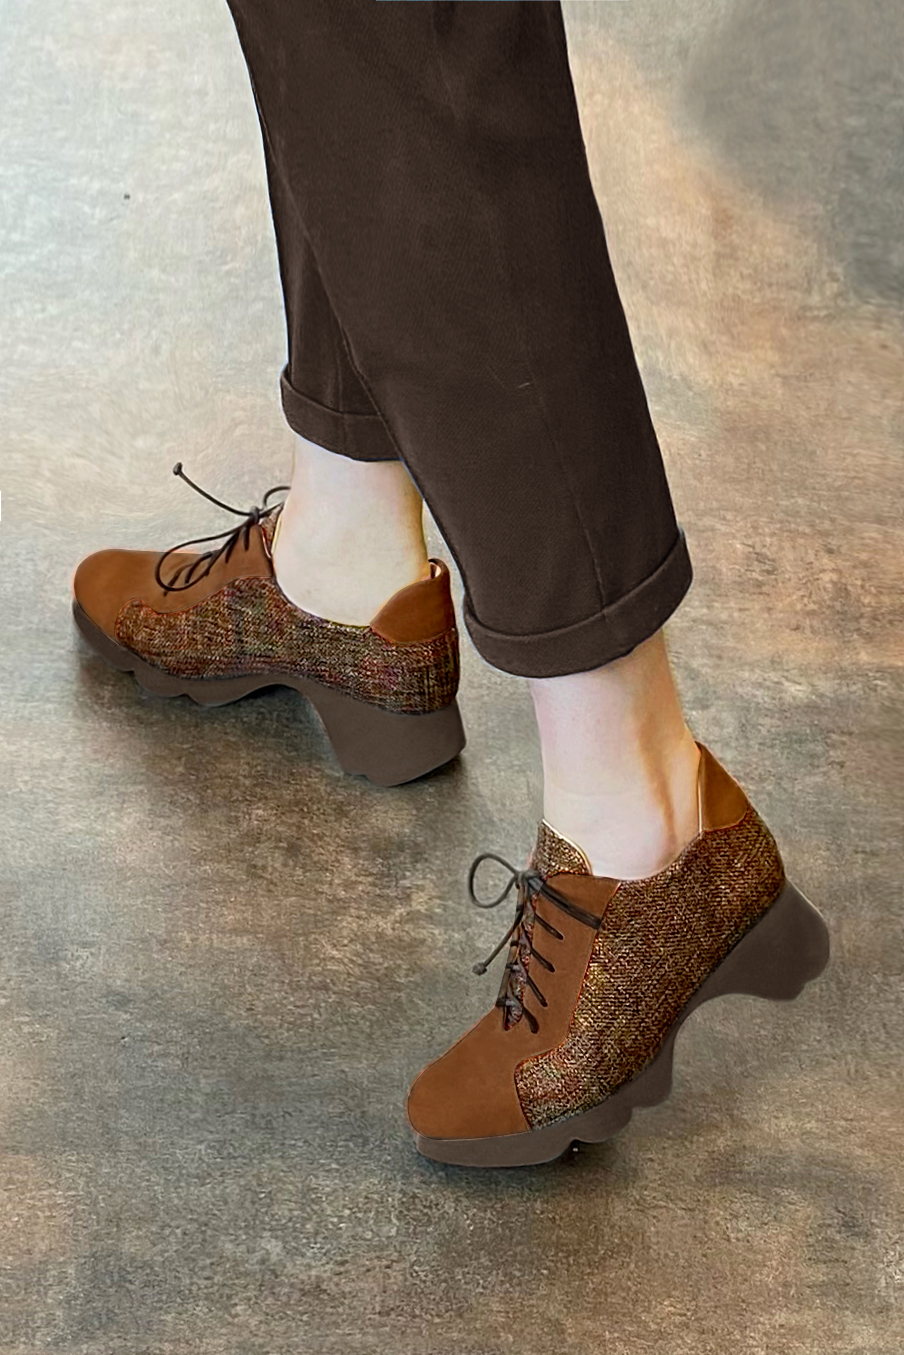 Caramel brown and terracotta orange women's casual lace-up shoes.. Worn view - Florence KOOIJMAN